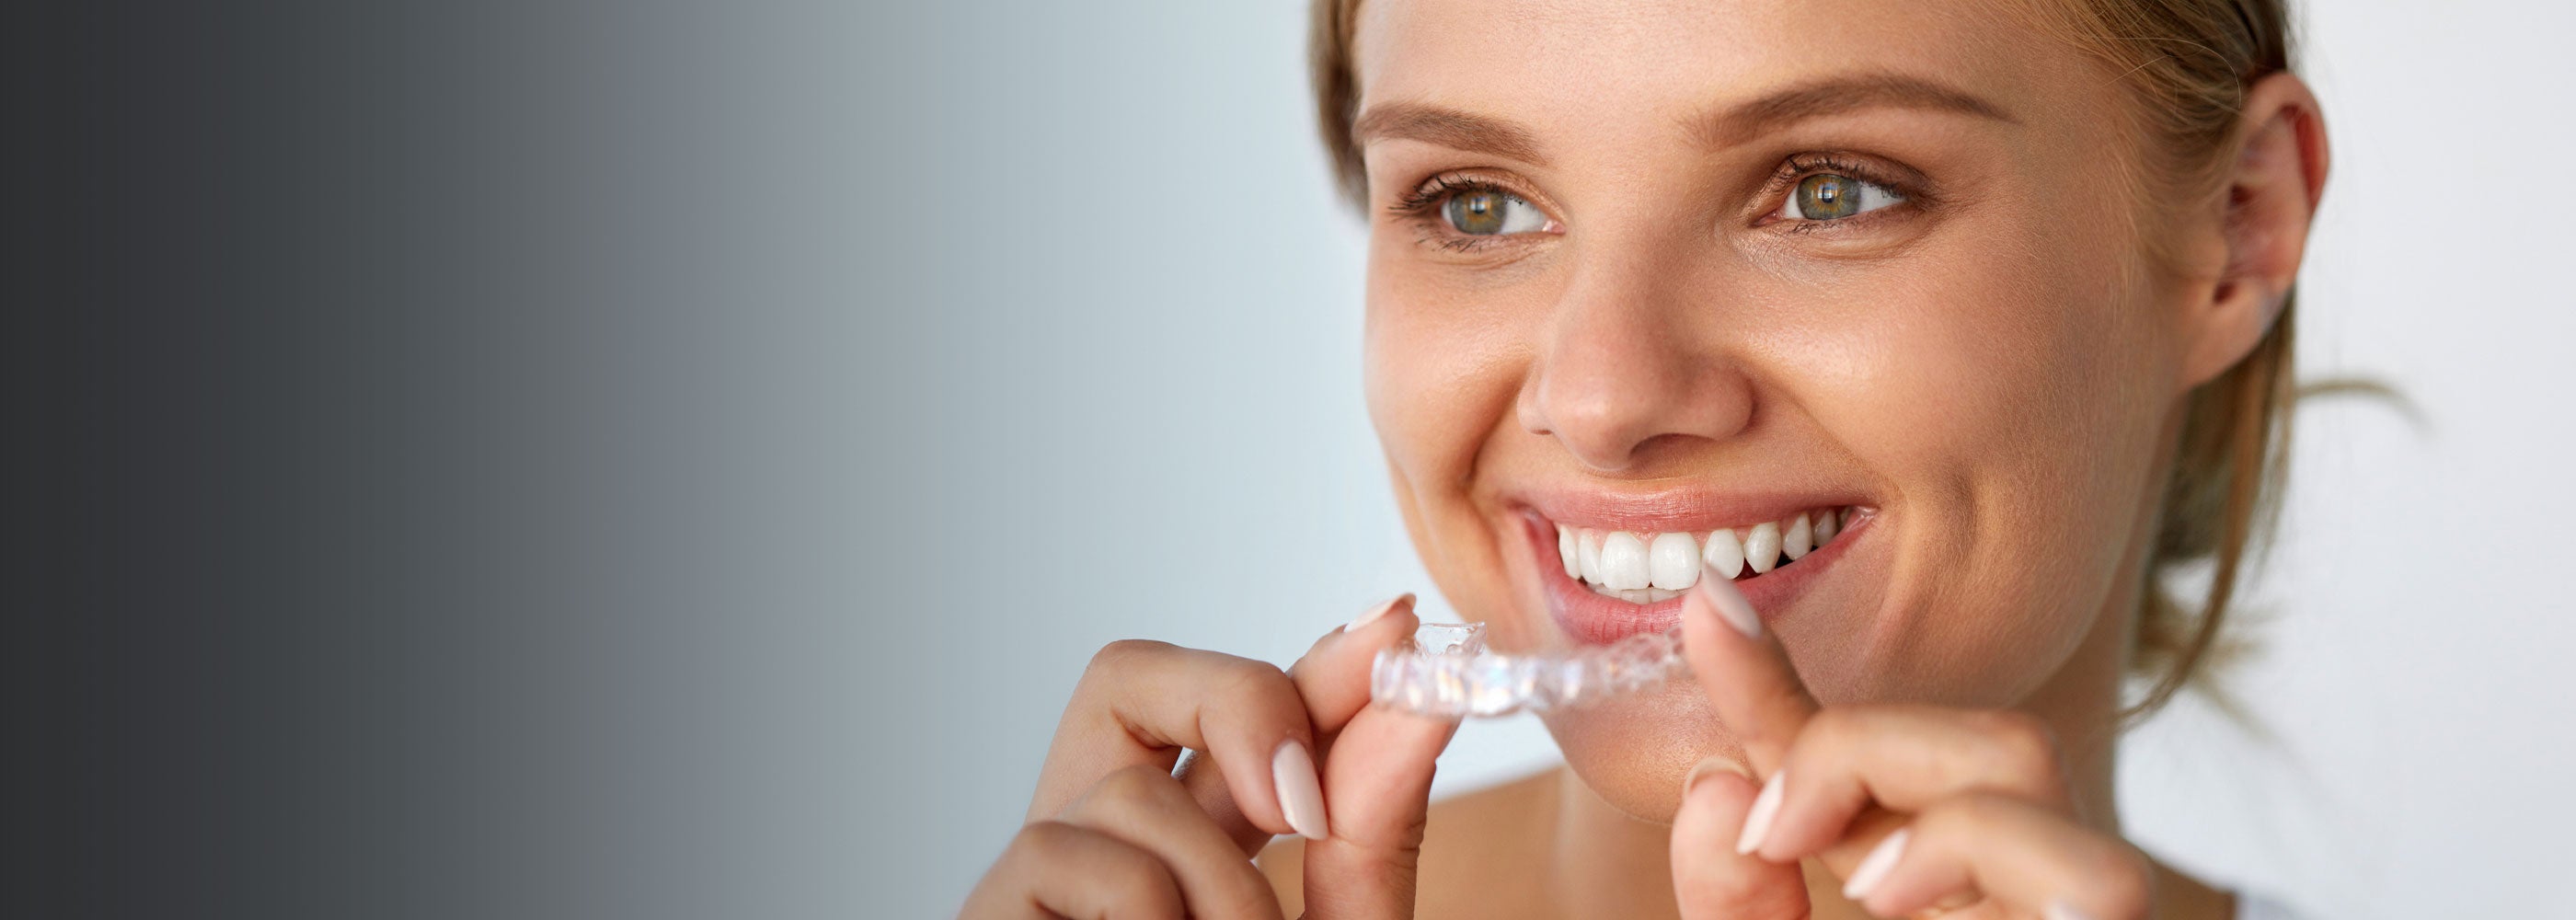 Lady holding a clear aligner for teeth straightening